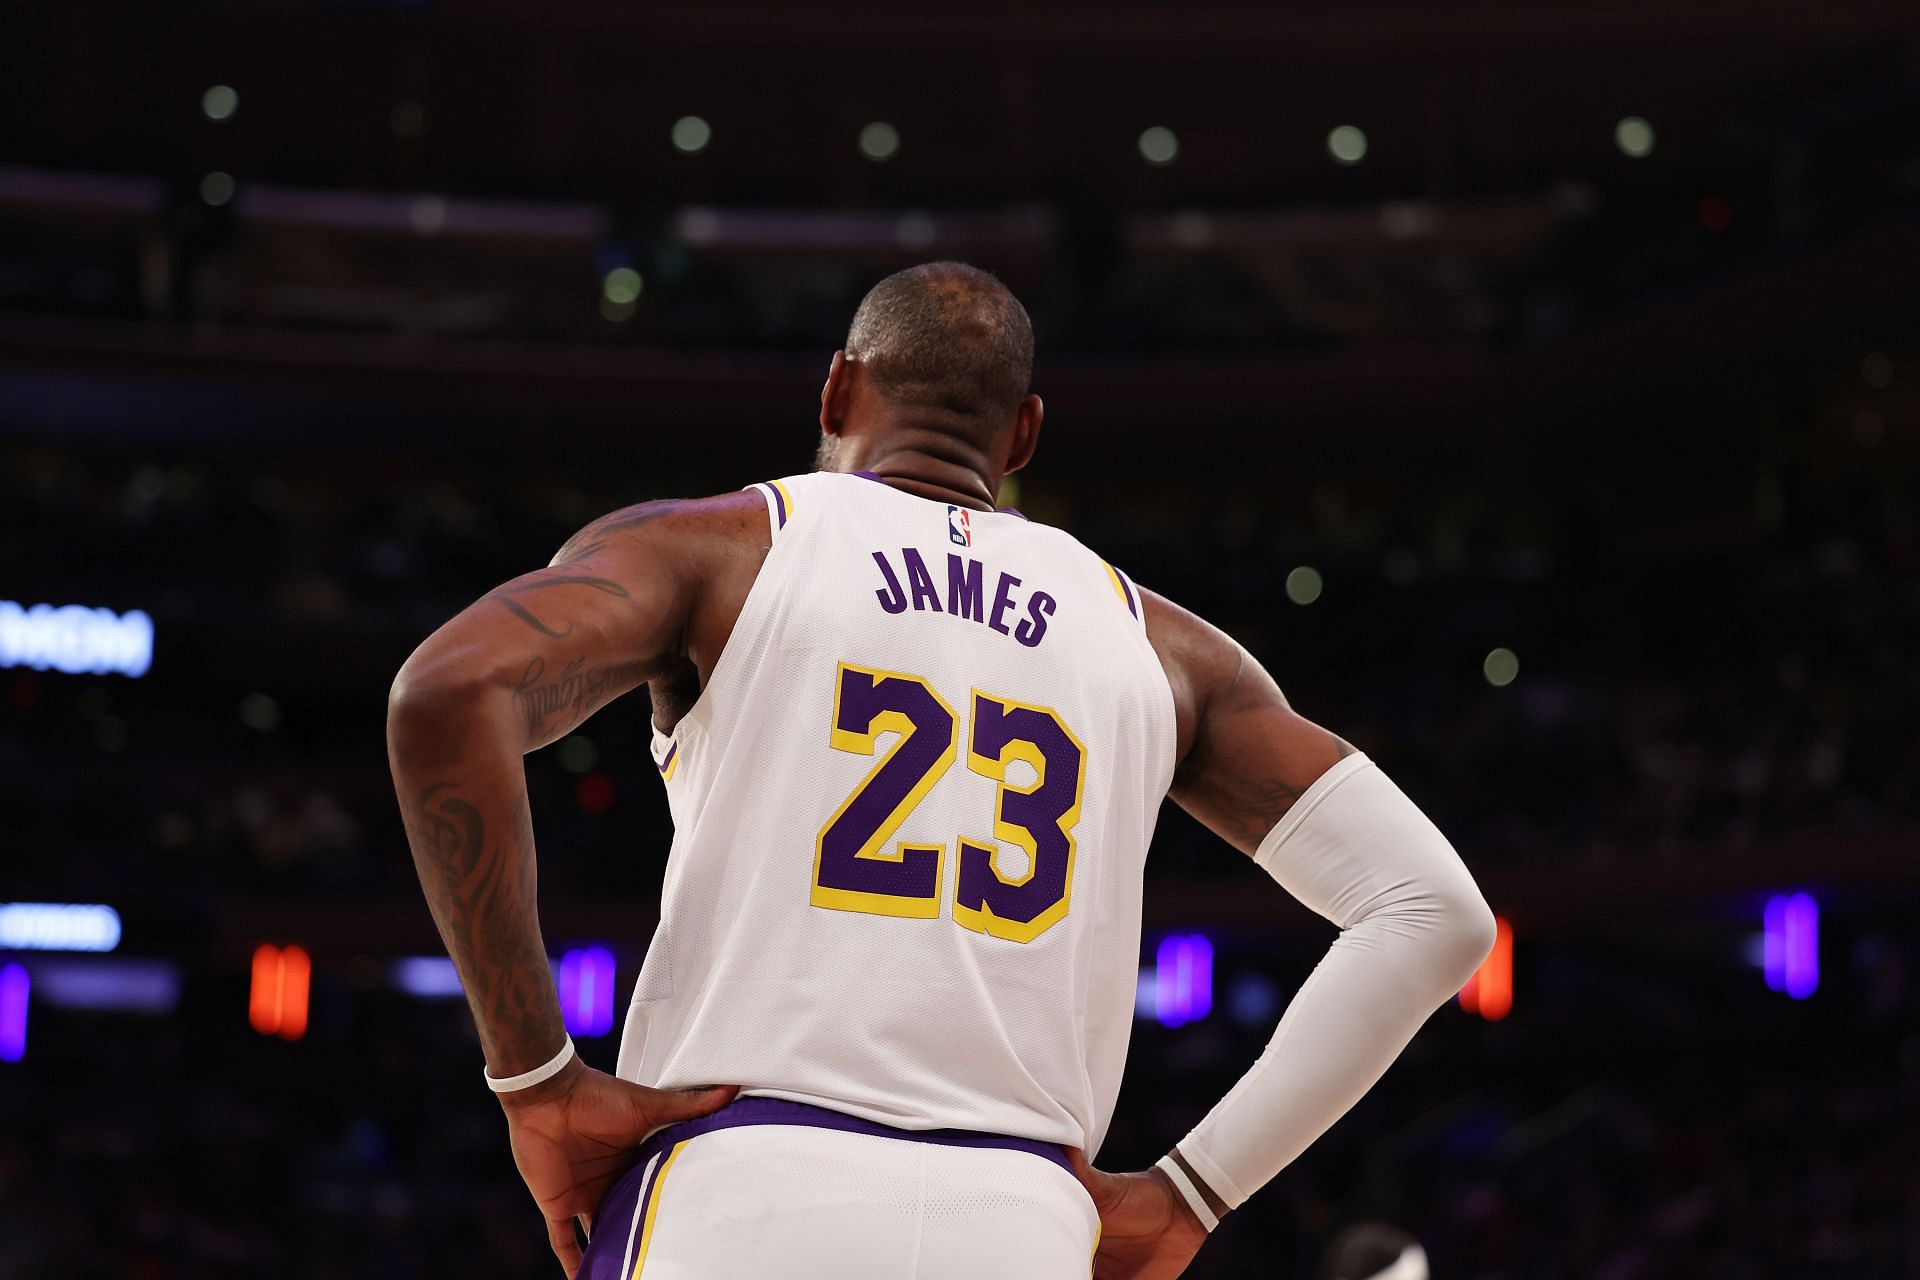 Los Angeles Lakers star LeBron James has long indicated his desire to play with his son, Bronny. That possibility certainly impacts Bronny James&#039; NBA draft stock.